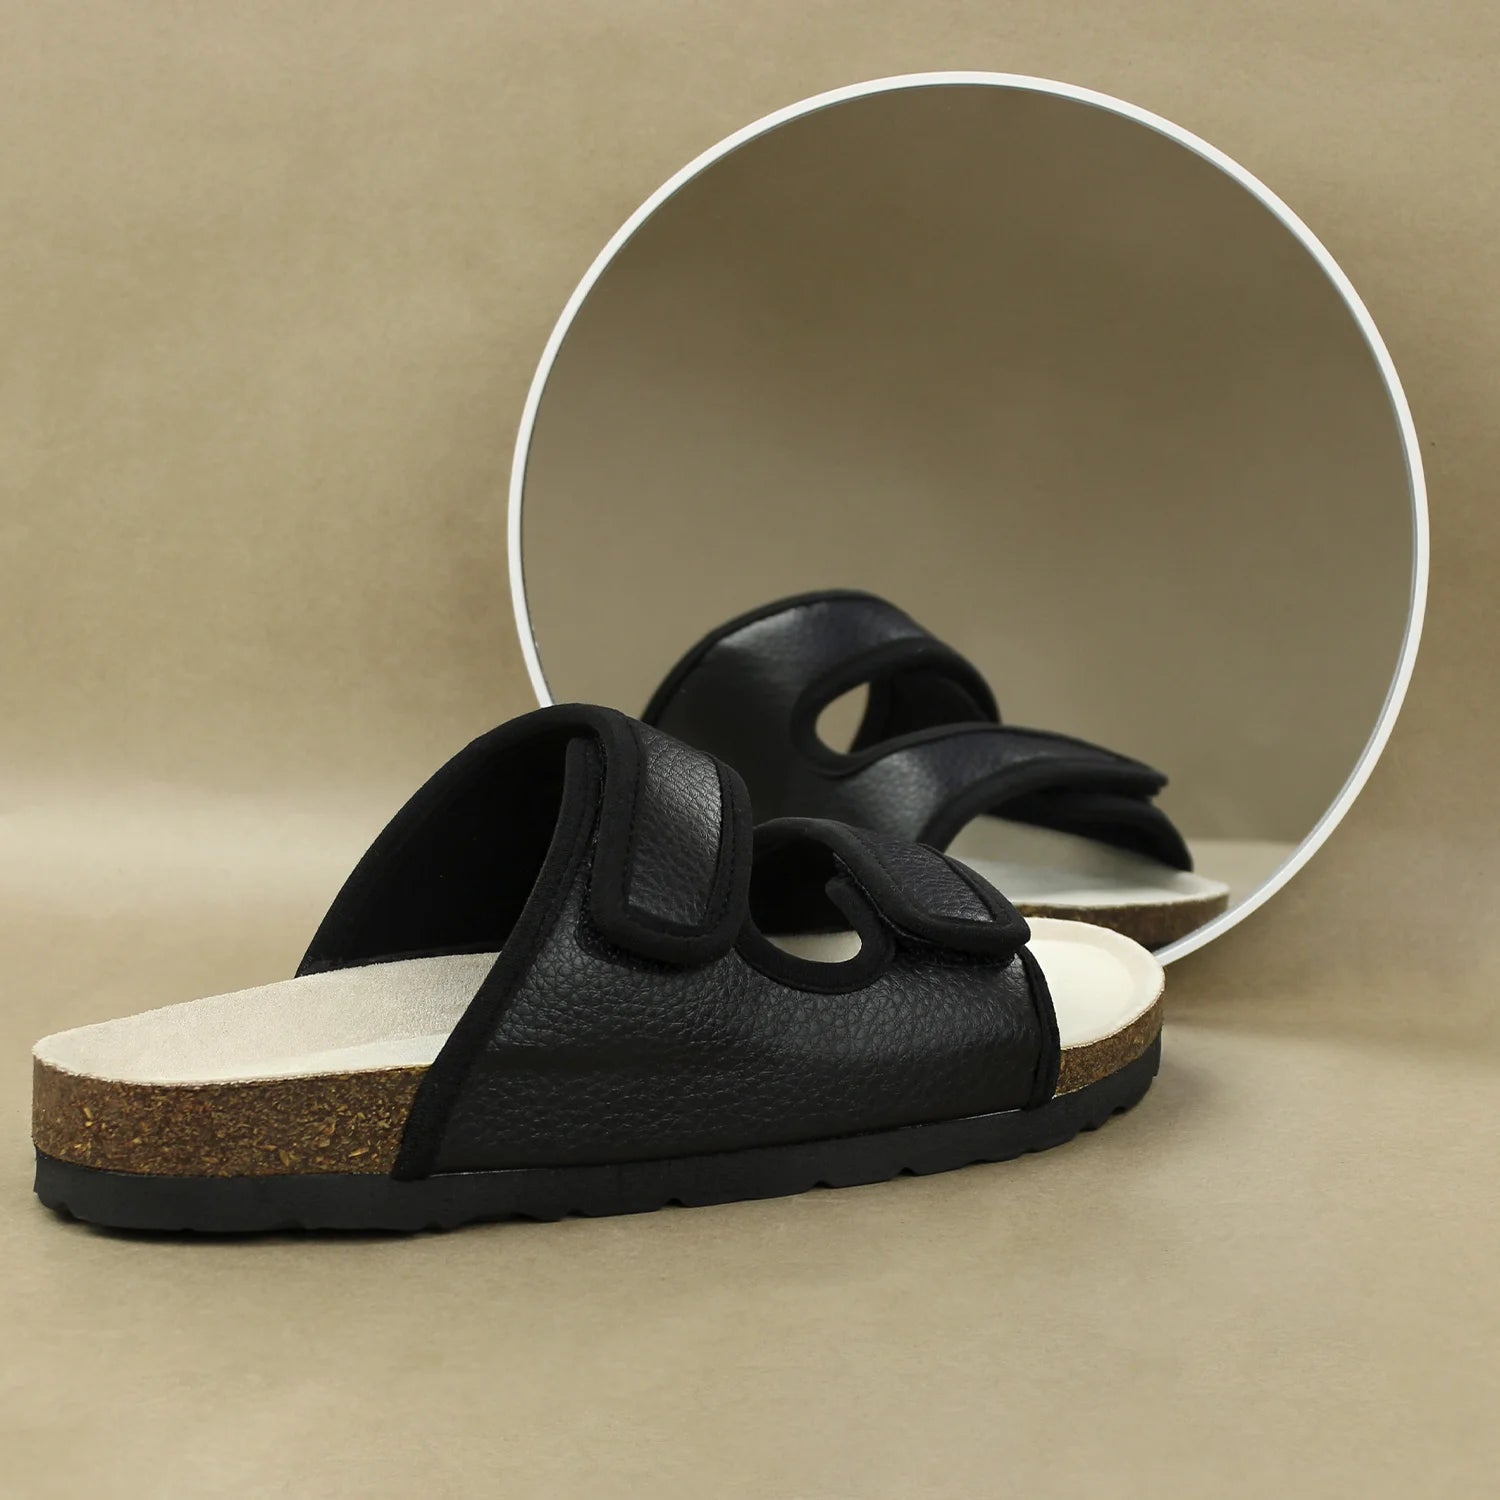 Stylish black cork sandals with molded footbed